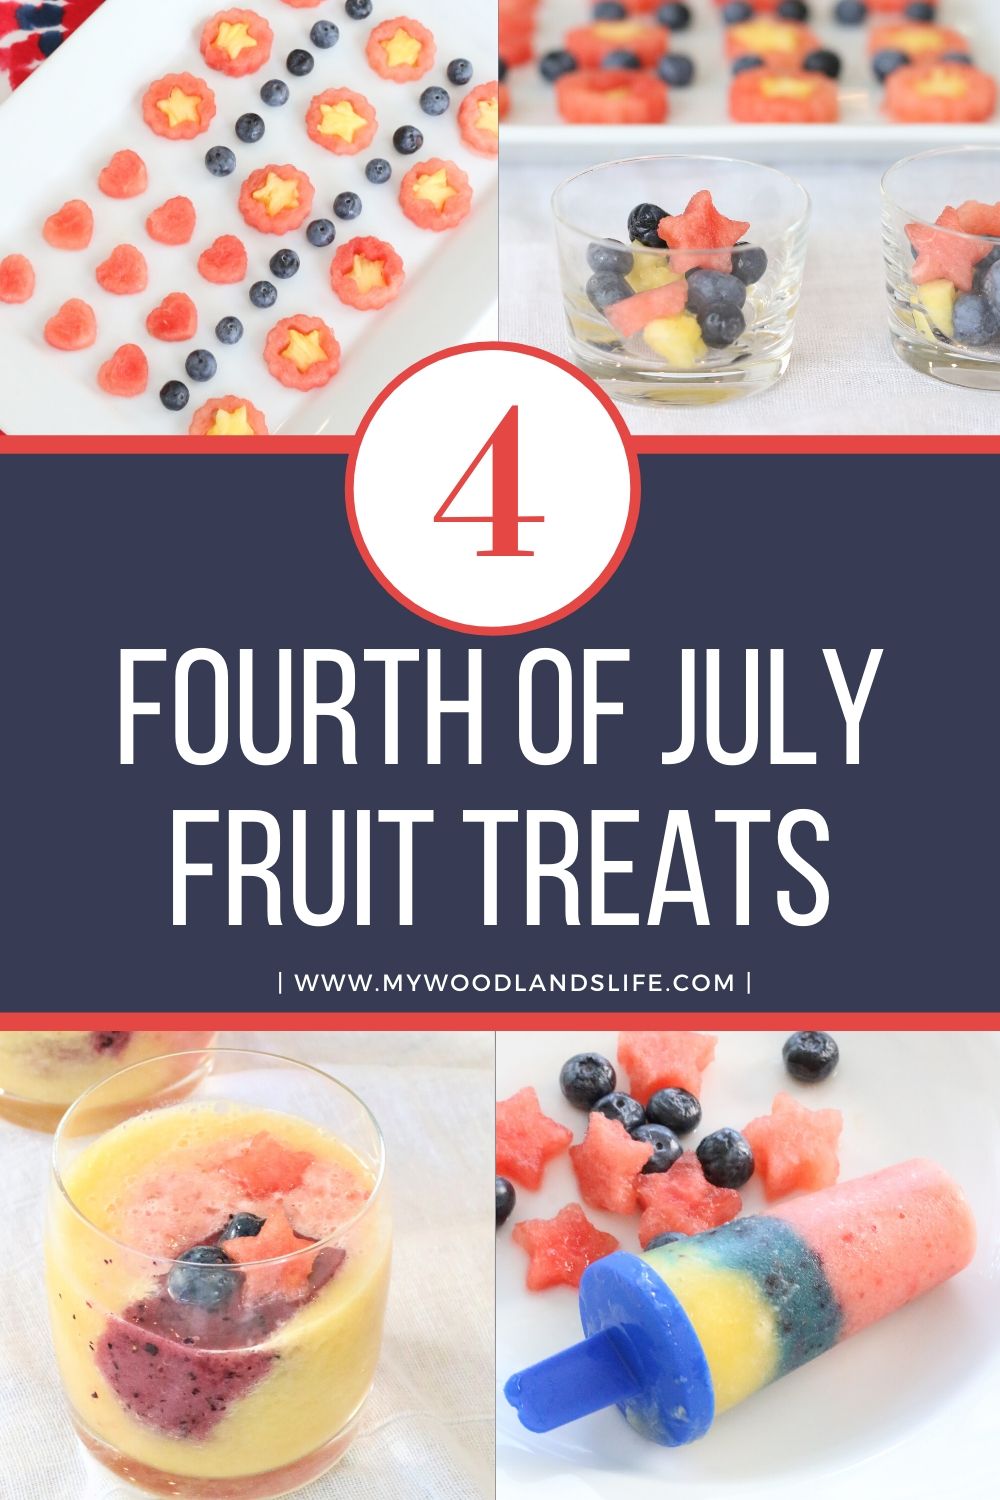 A 4th of July Flag Fruit Tray and more healthy fruit snack ideas for parties or celebrating the holiday at home.